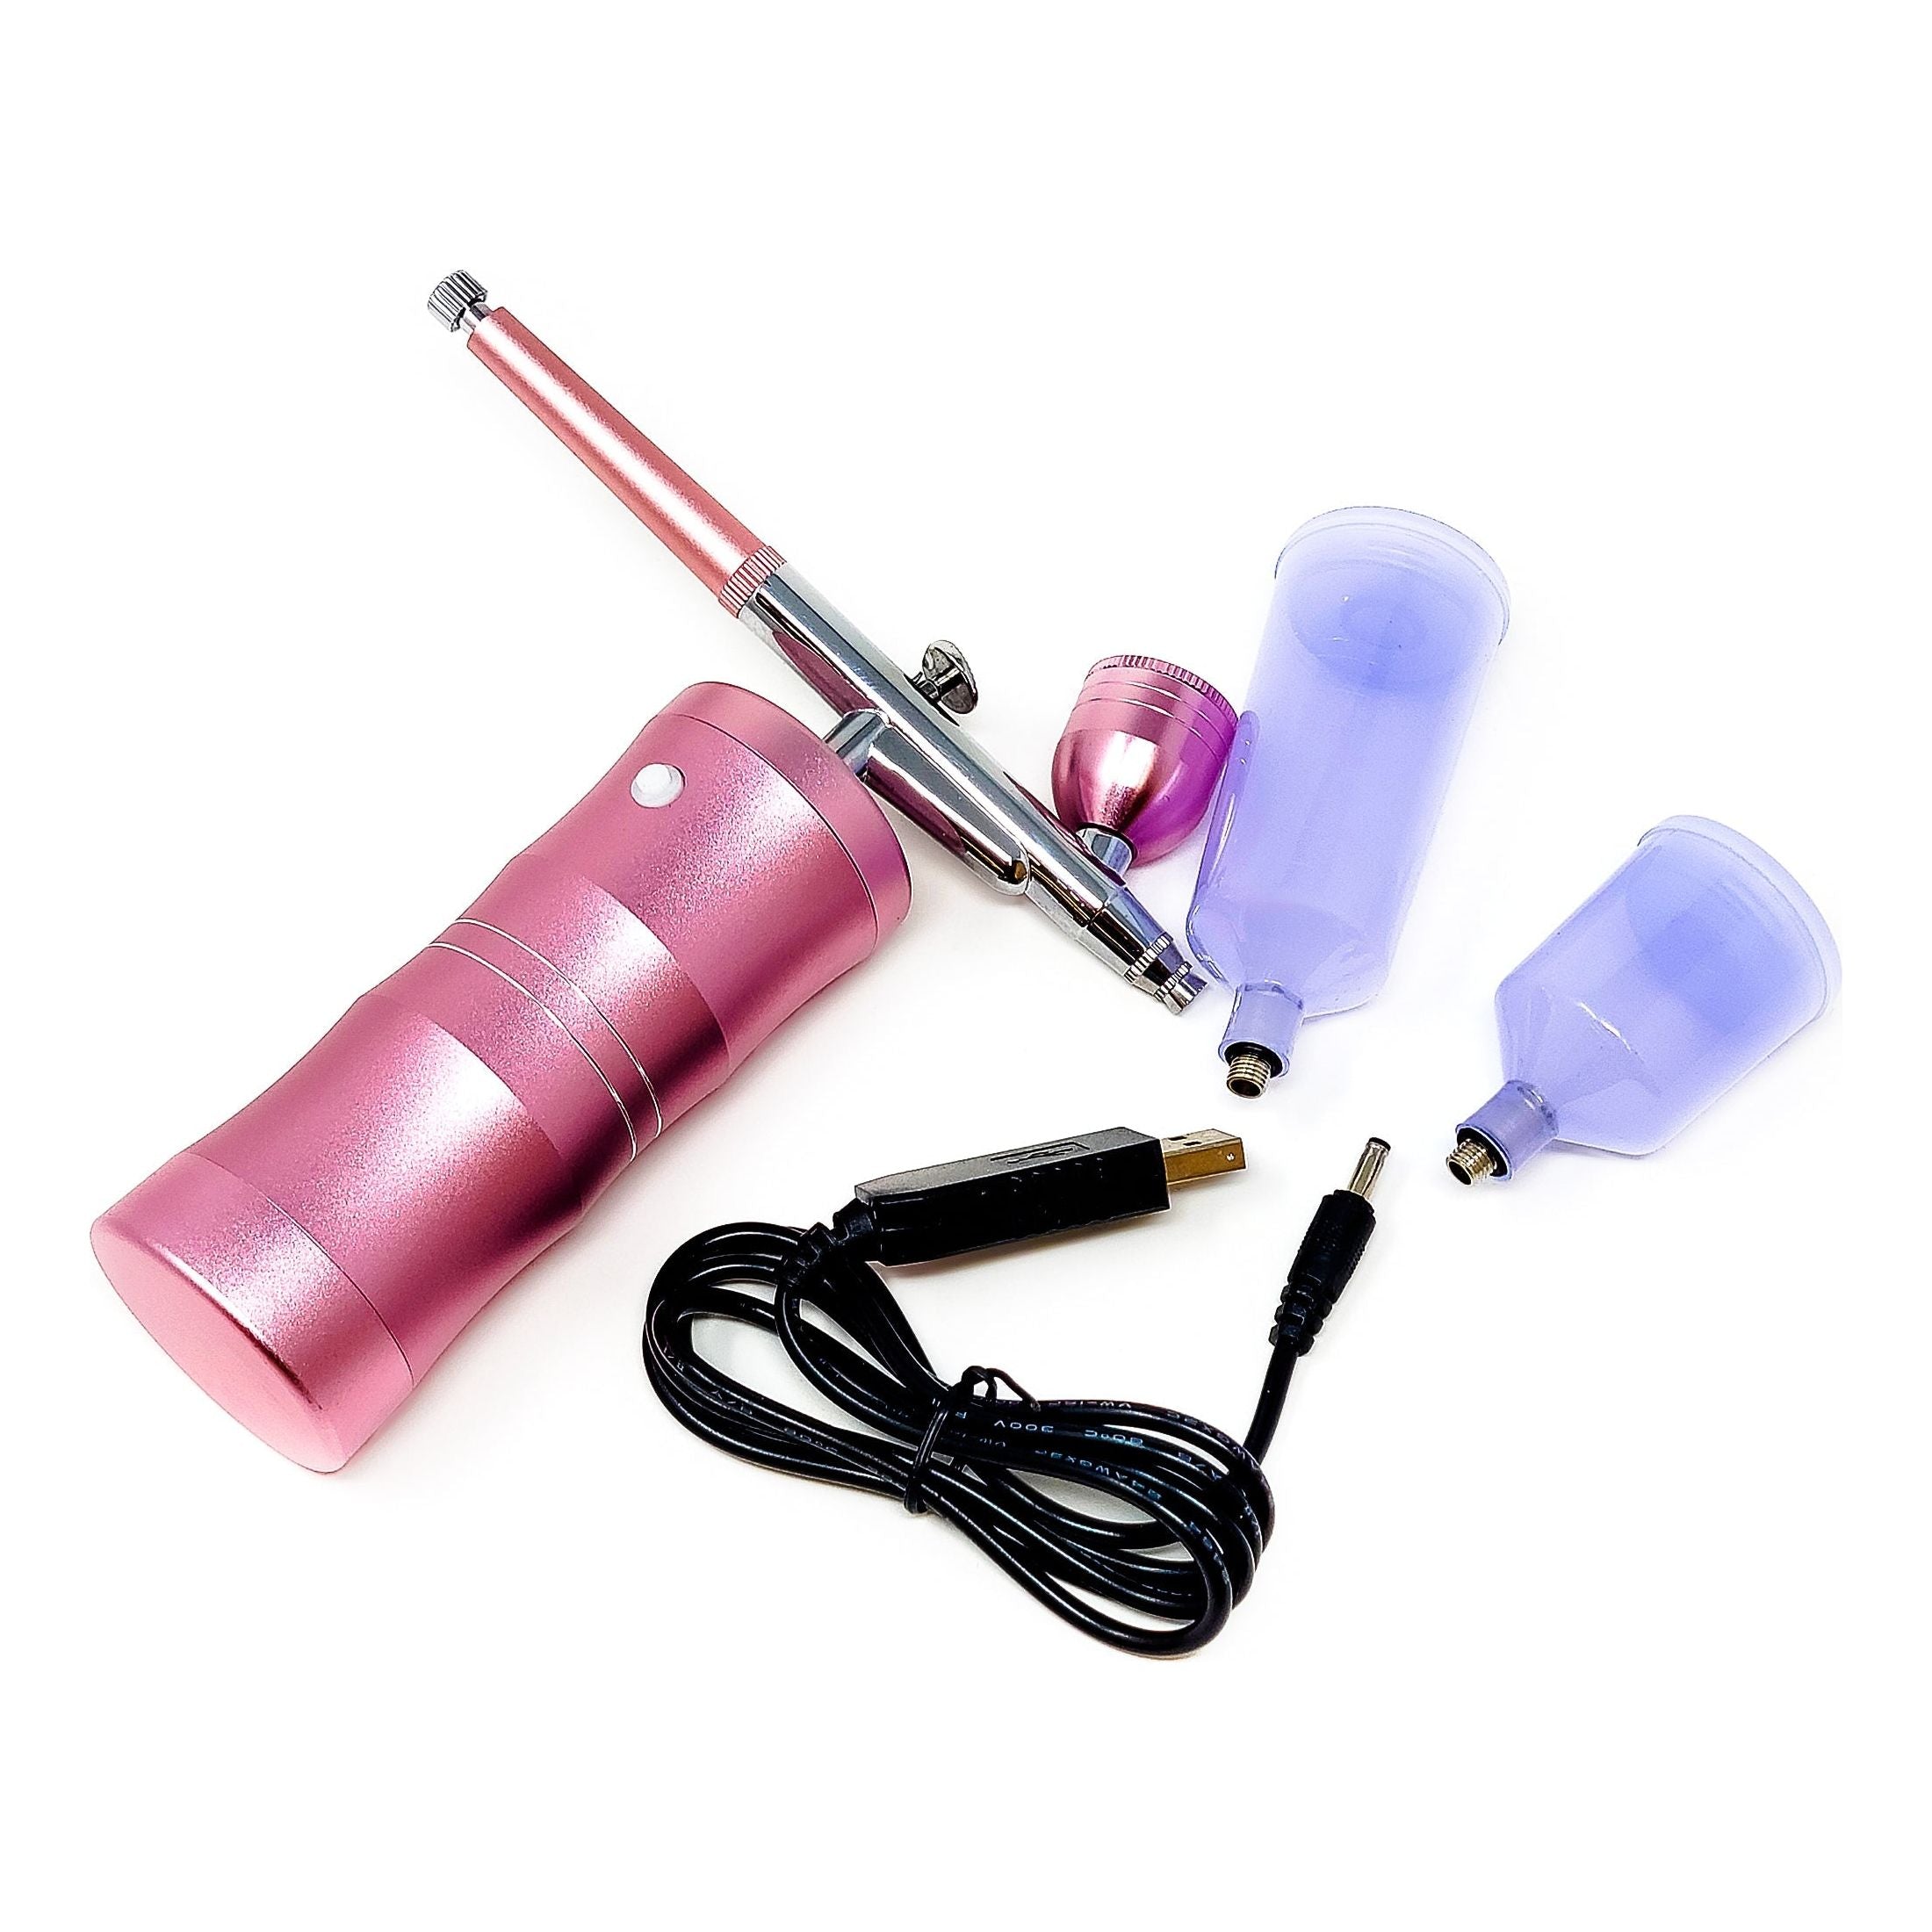 Aysun Beauty Warehouse - Professional Cordless Rechargeable Airbrush Kit | Air Brush For Paint, Makeup & Etc